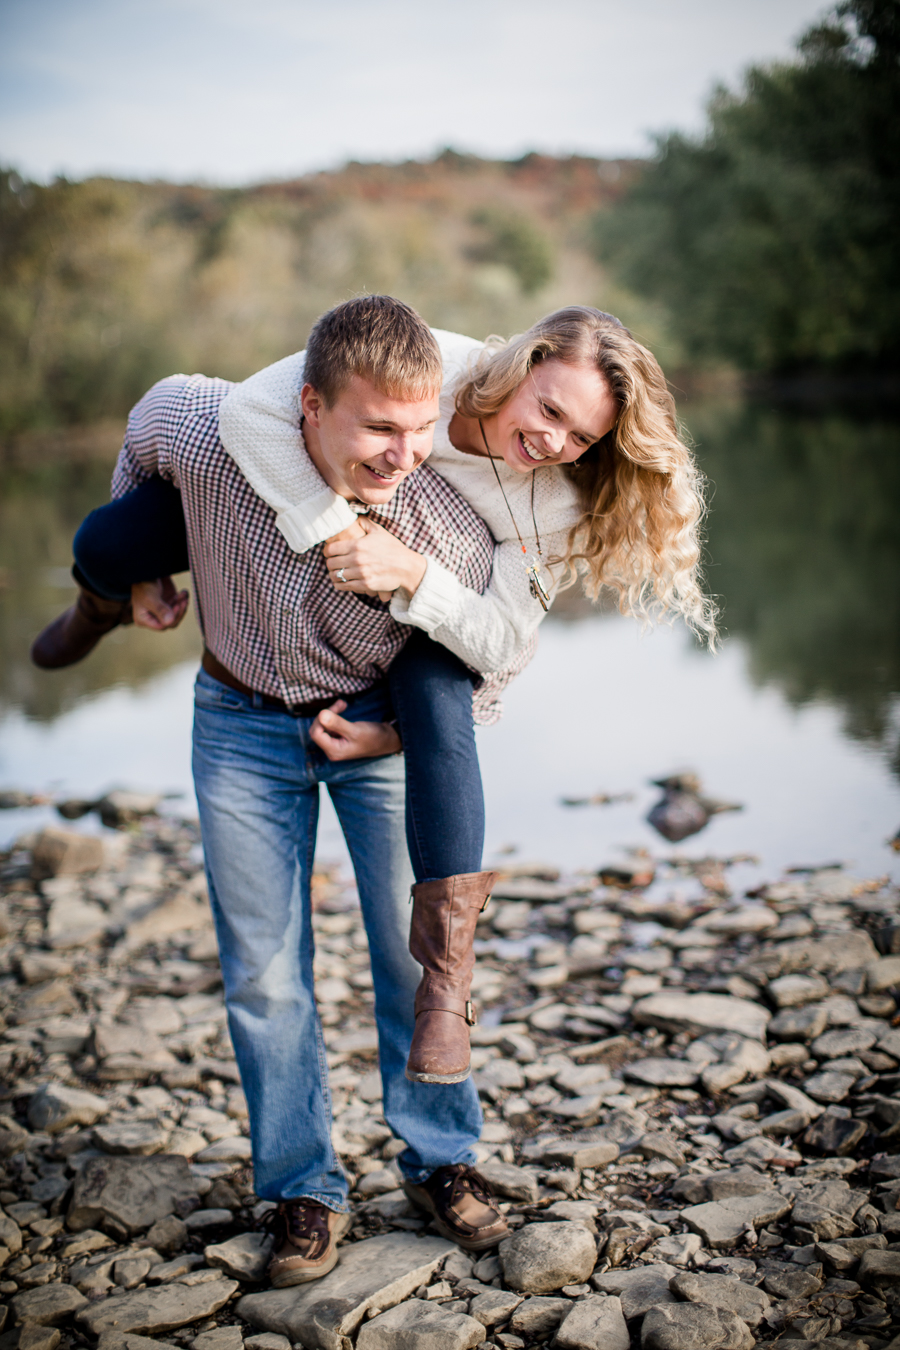 Playing with her on his back engagement photo by Knoxville Wedding Photographer, Amanda May Photos.